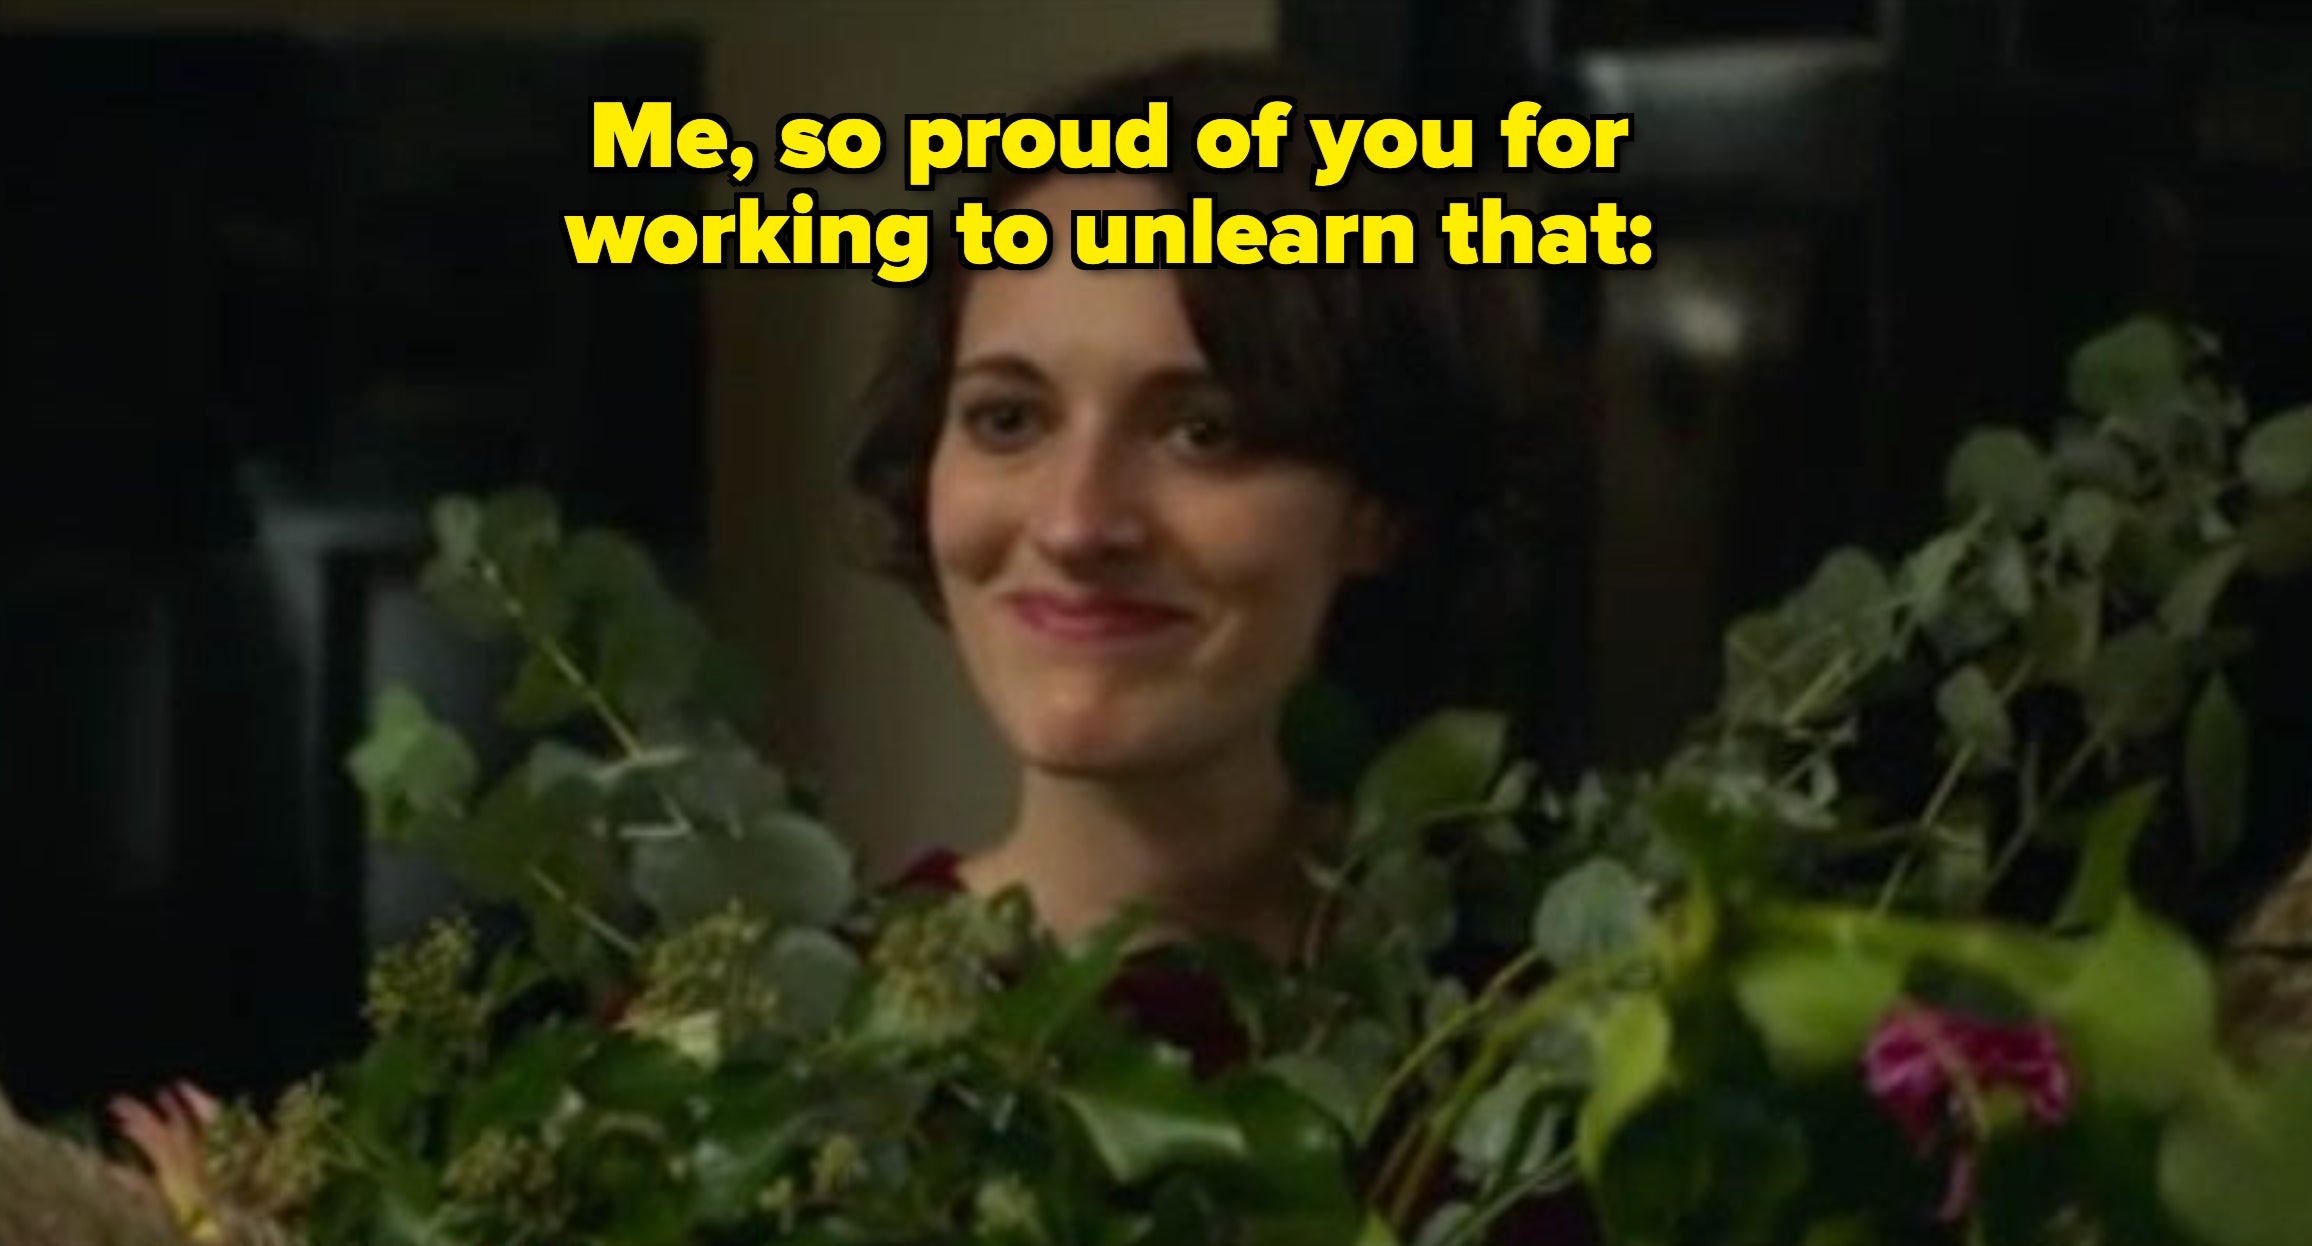 &quot;Me, so proud of you for working to unlearn that:&quot;